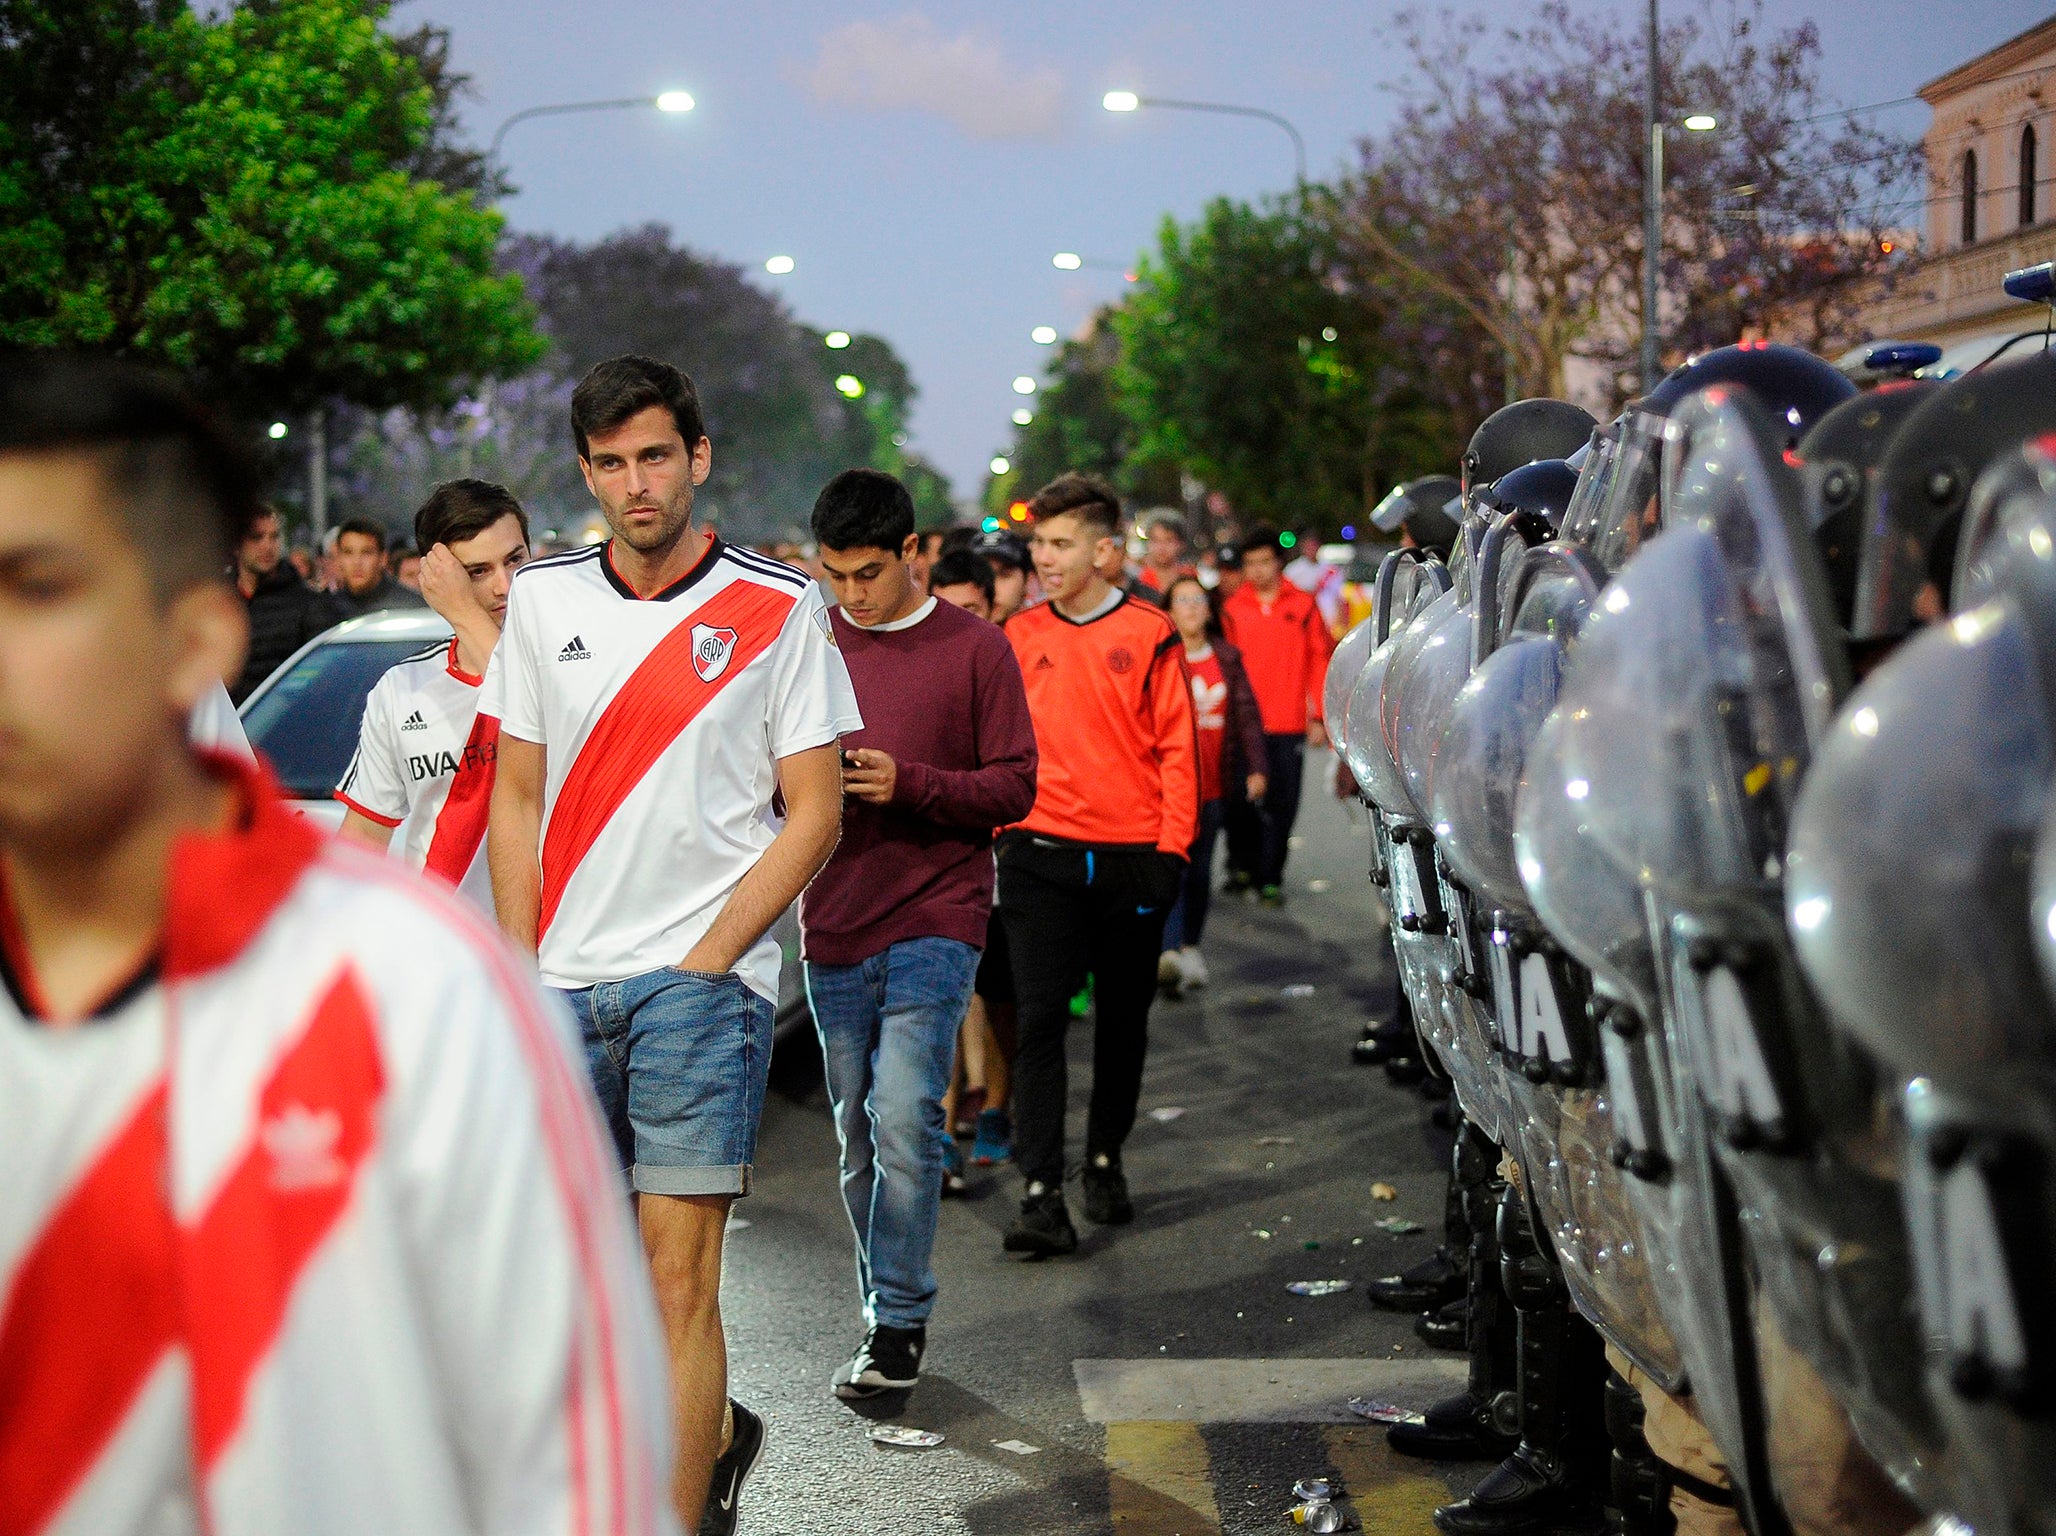 Supporters of River Plate leave the Monumental stadium in Buenos Aires after authorities first postponed the match